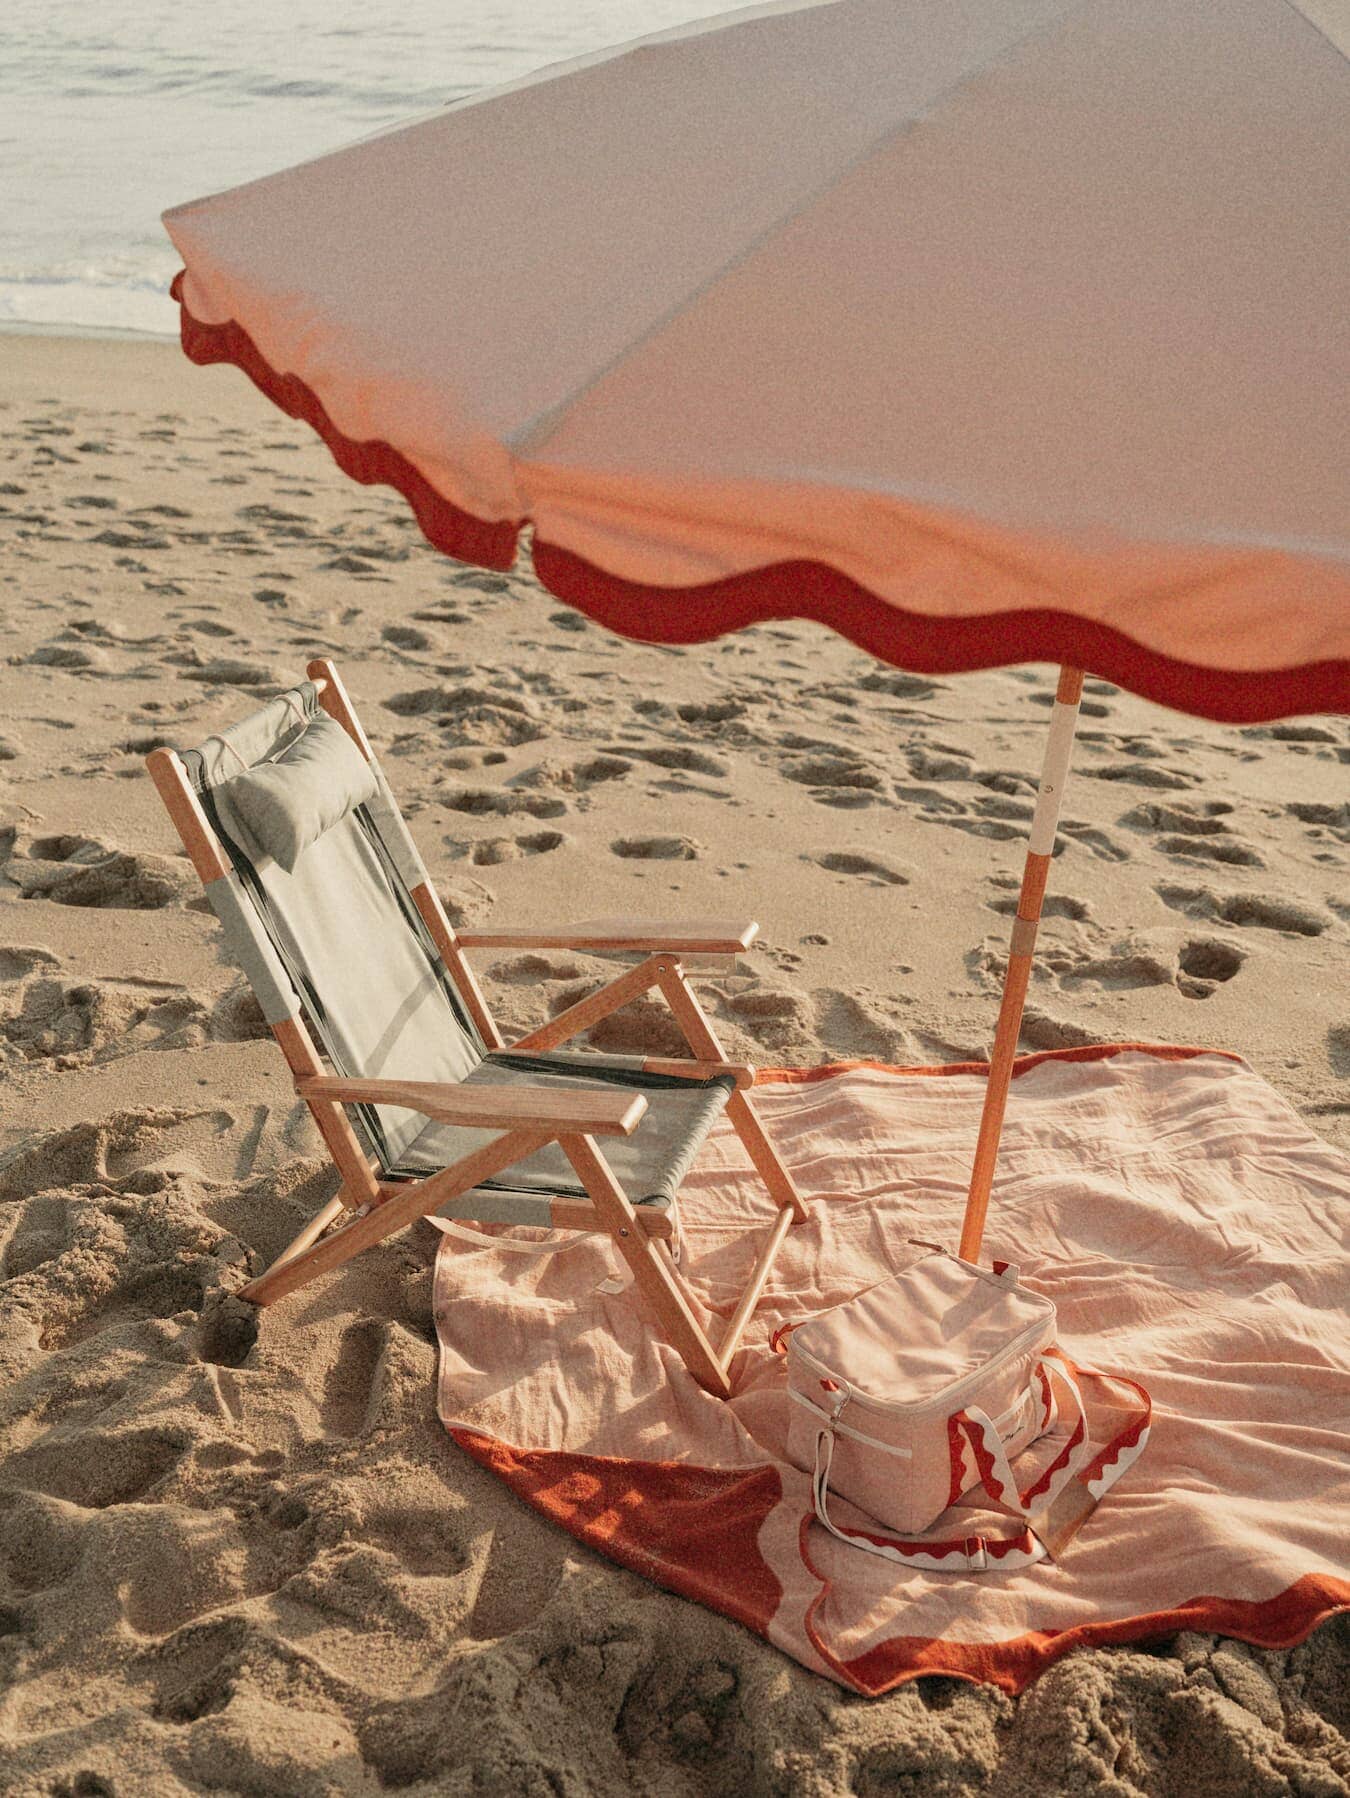 Riviera pink beach set up with amalfi umbrella, chair and accesories. 